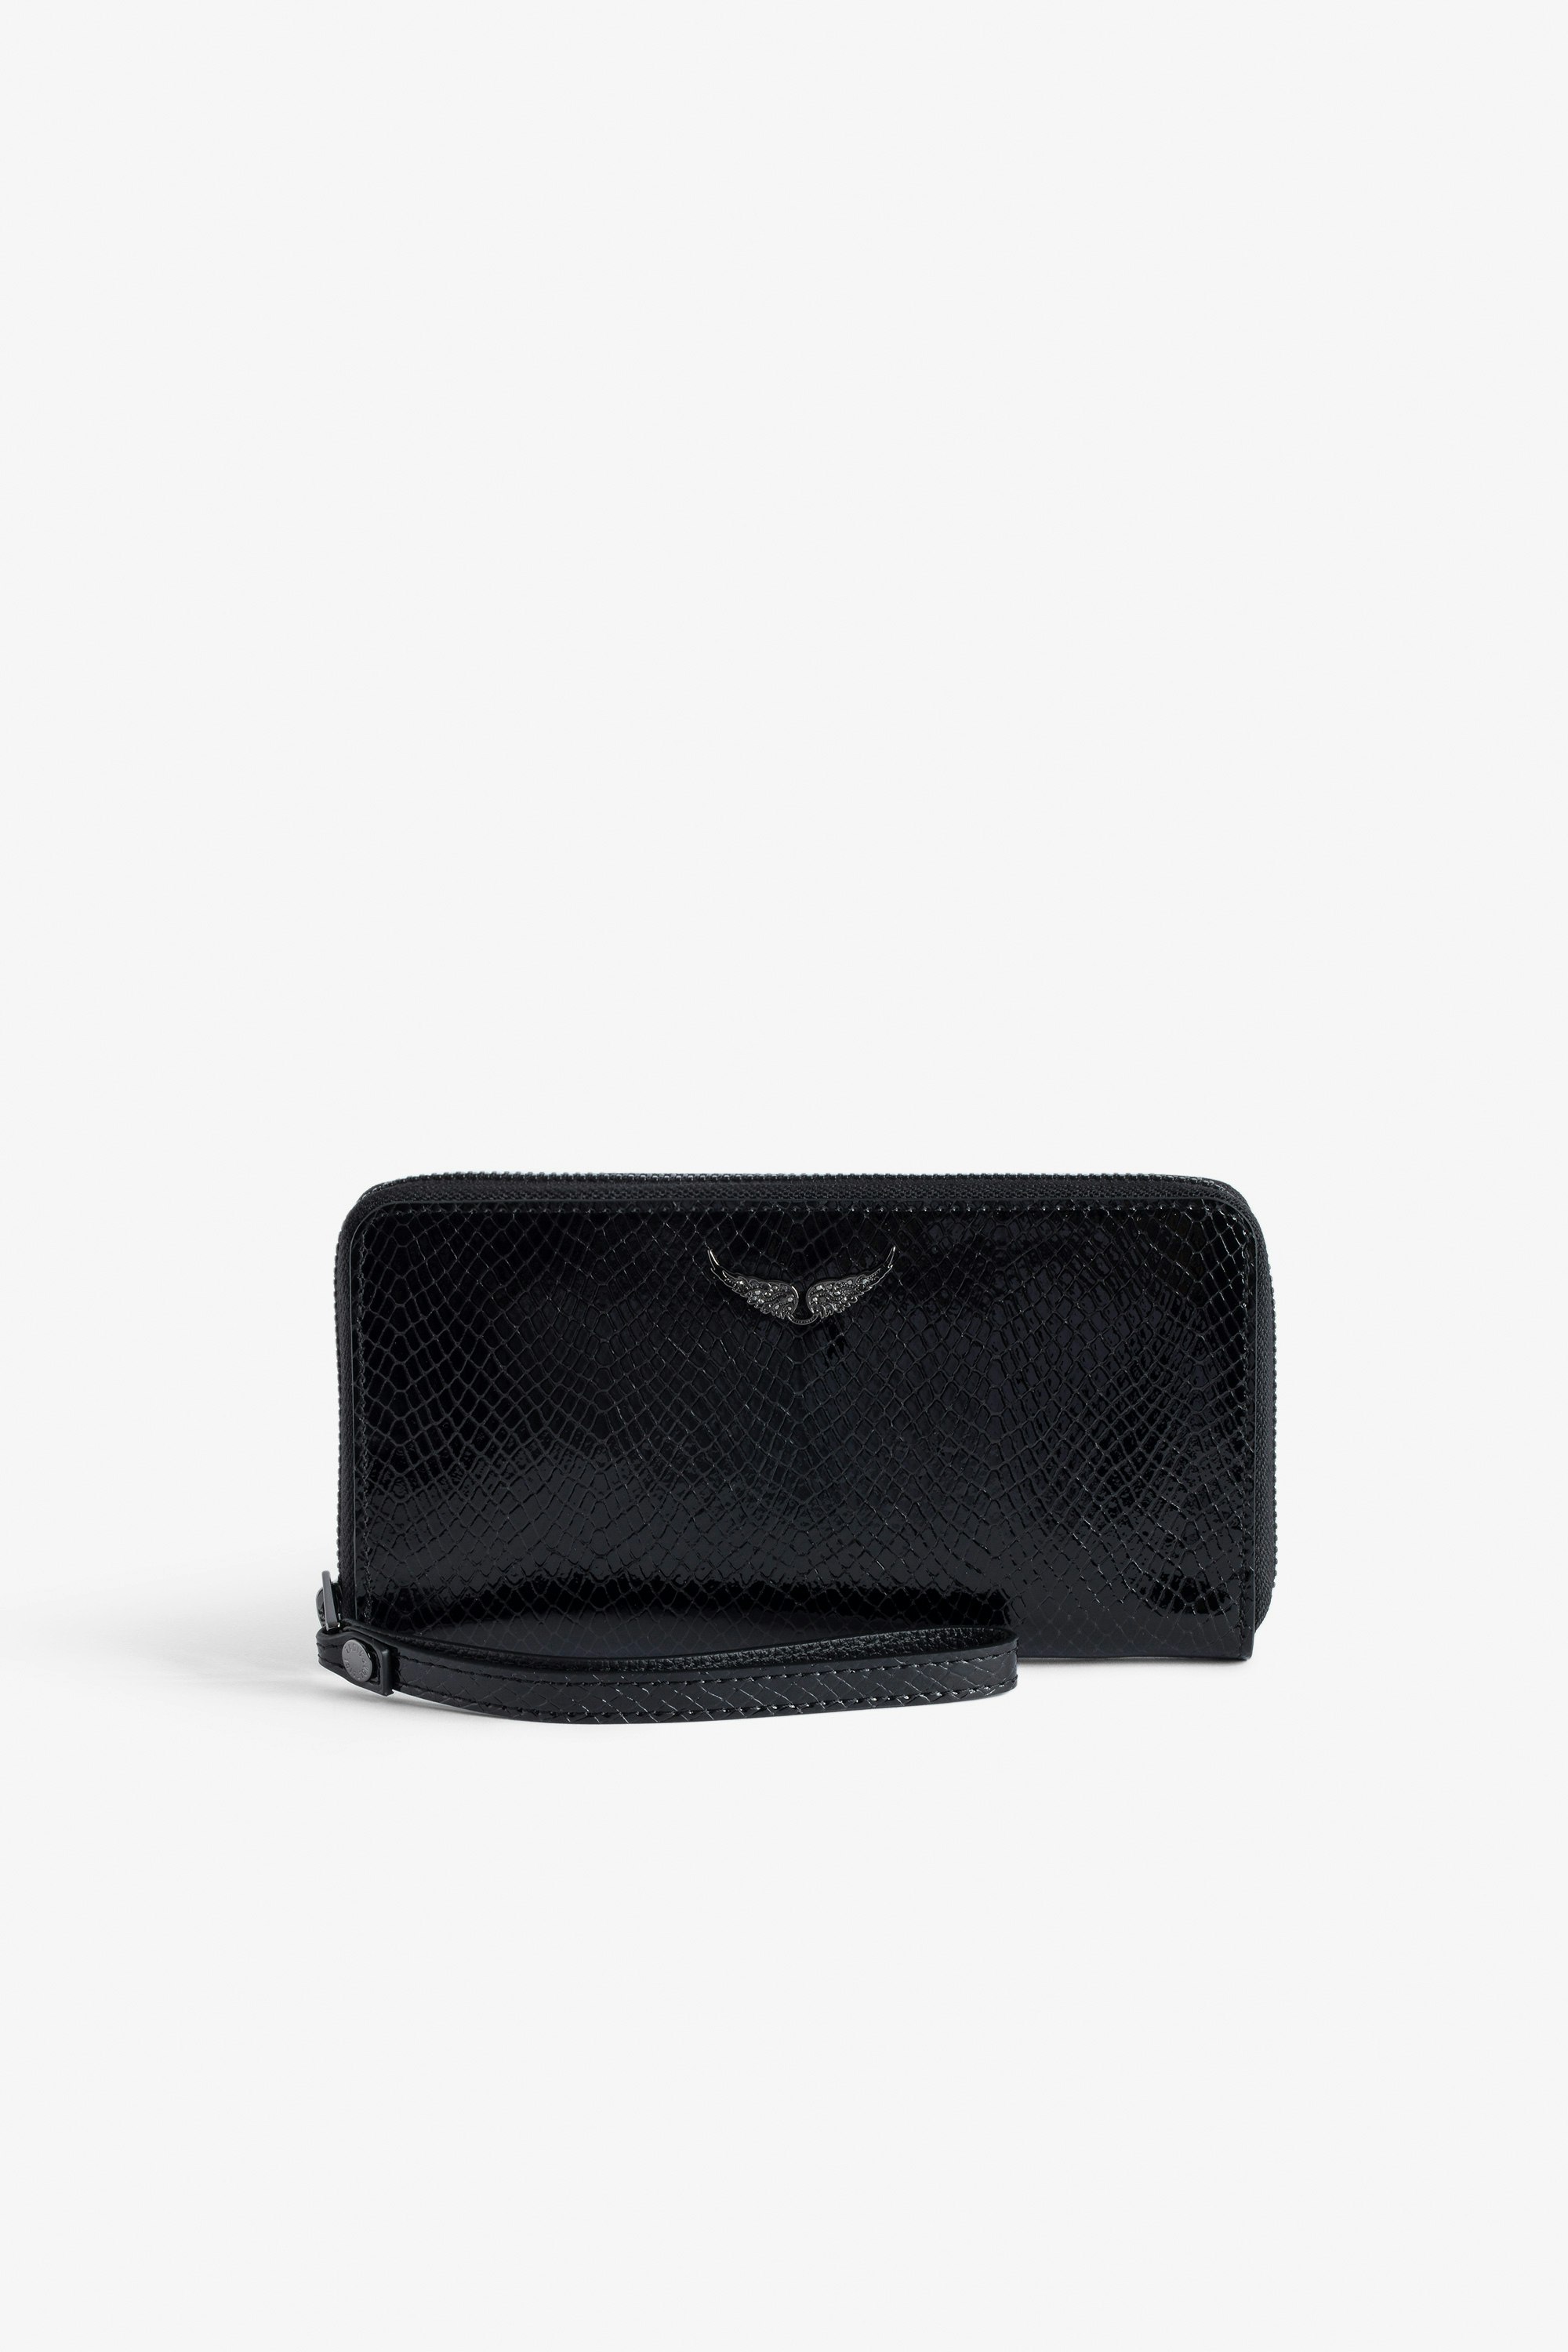 Compagnon Embossed Wallet - Women’s black python-effect patent leather wallet with wings charm.